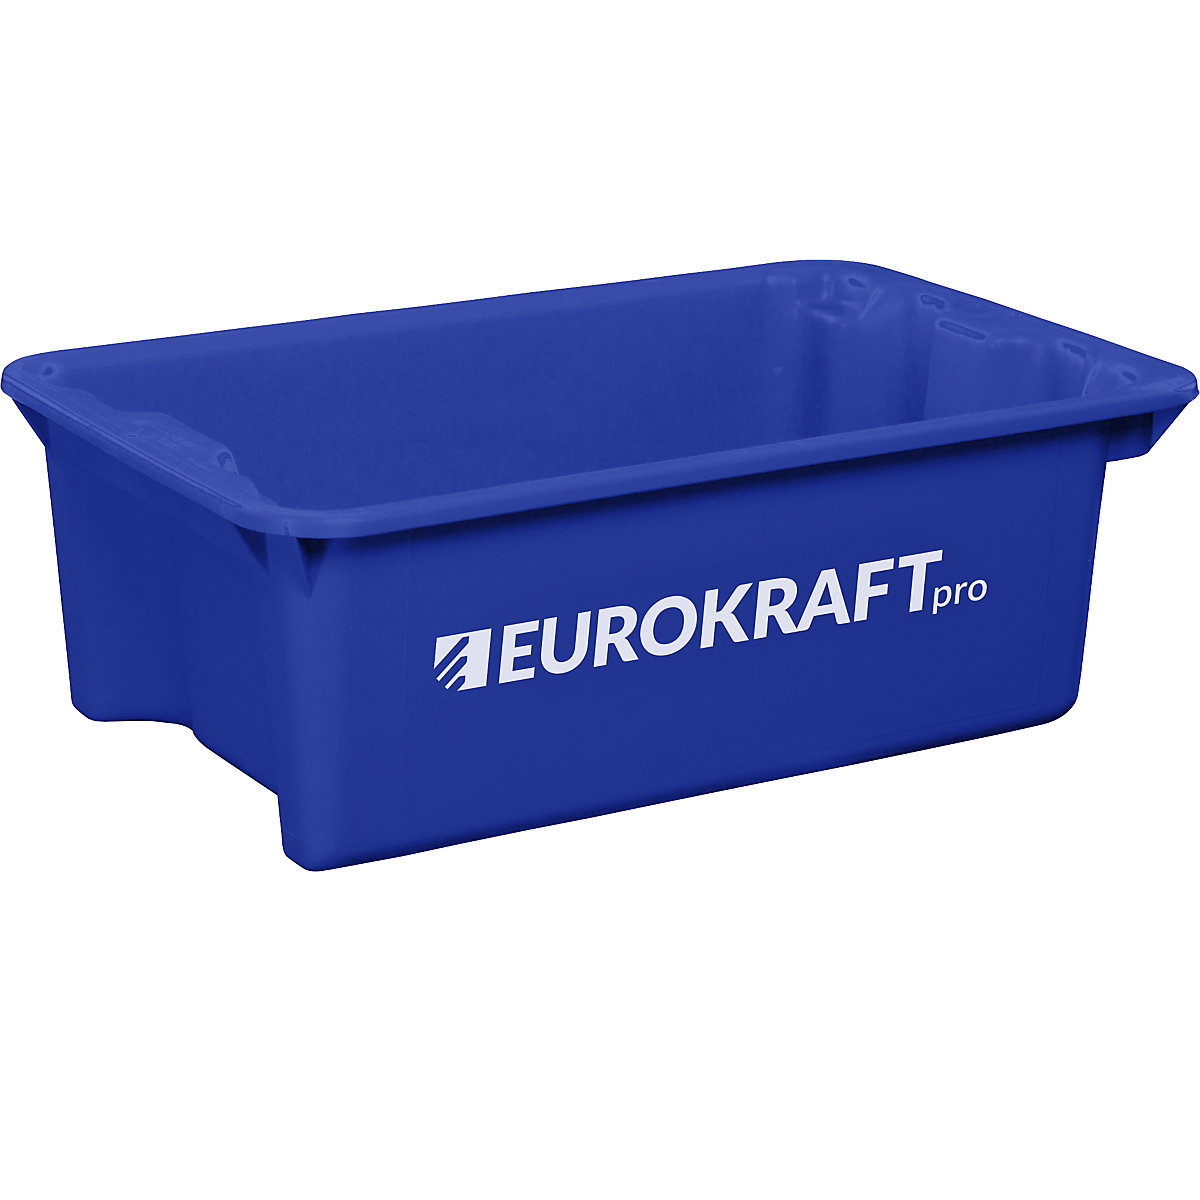 EUROKRAFTpro – Stack/nest container made of polypropylene suitable for foodstuffs, 34 l capacity, pack of 3, solid walls and base, blue